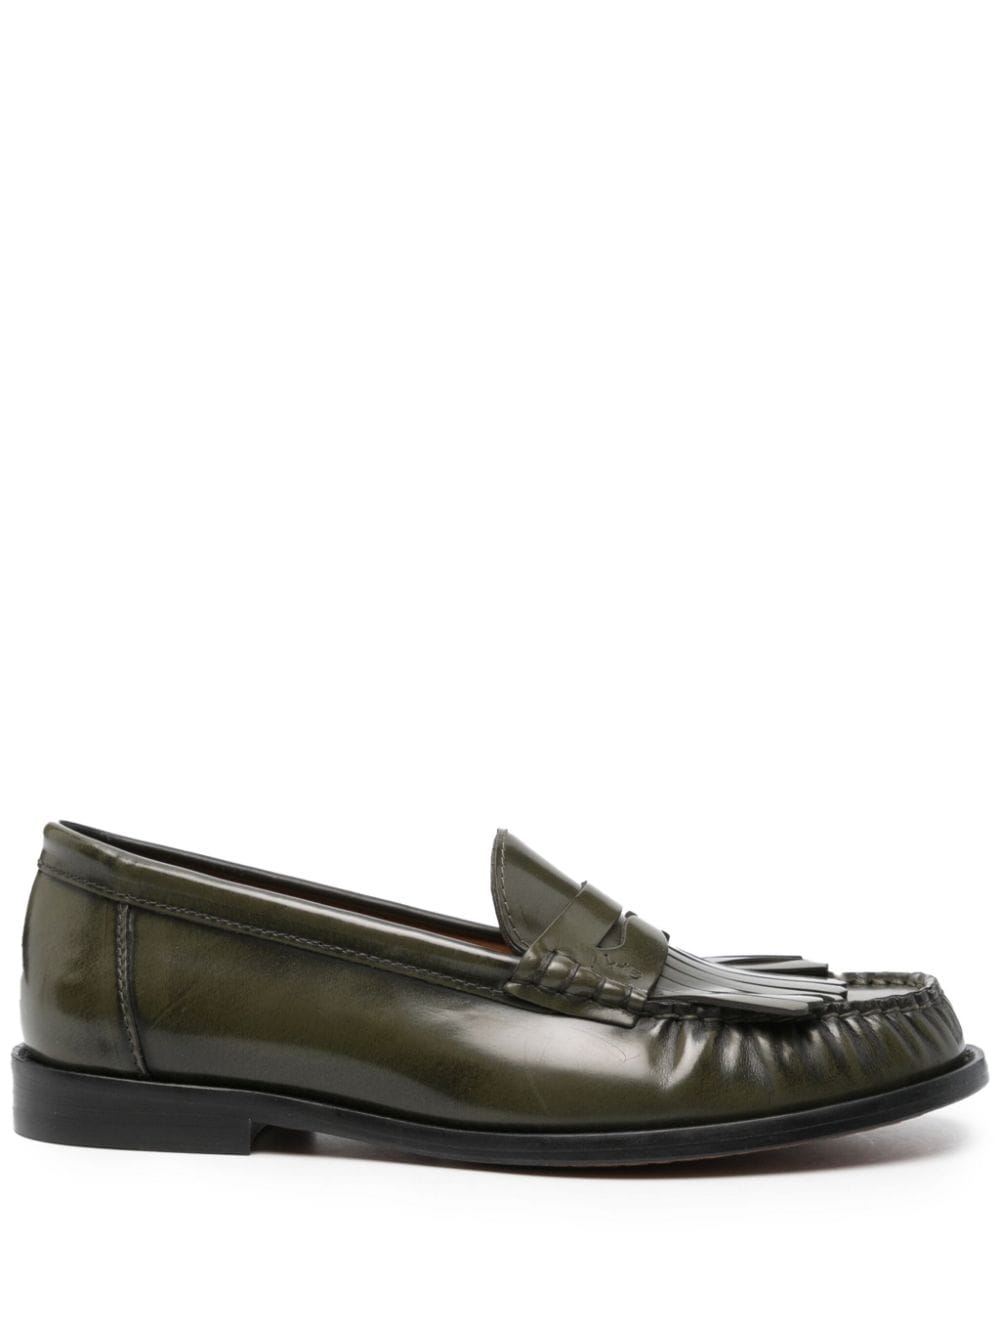 Image 1 of Polo Ralph Lauren fringed leather loafers